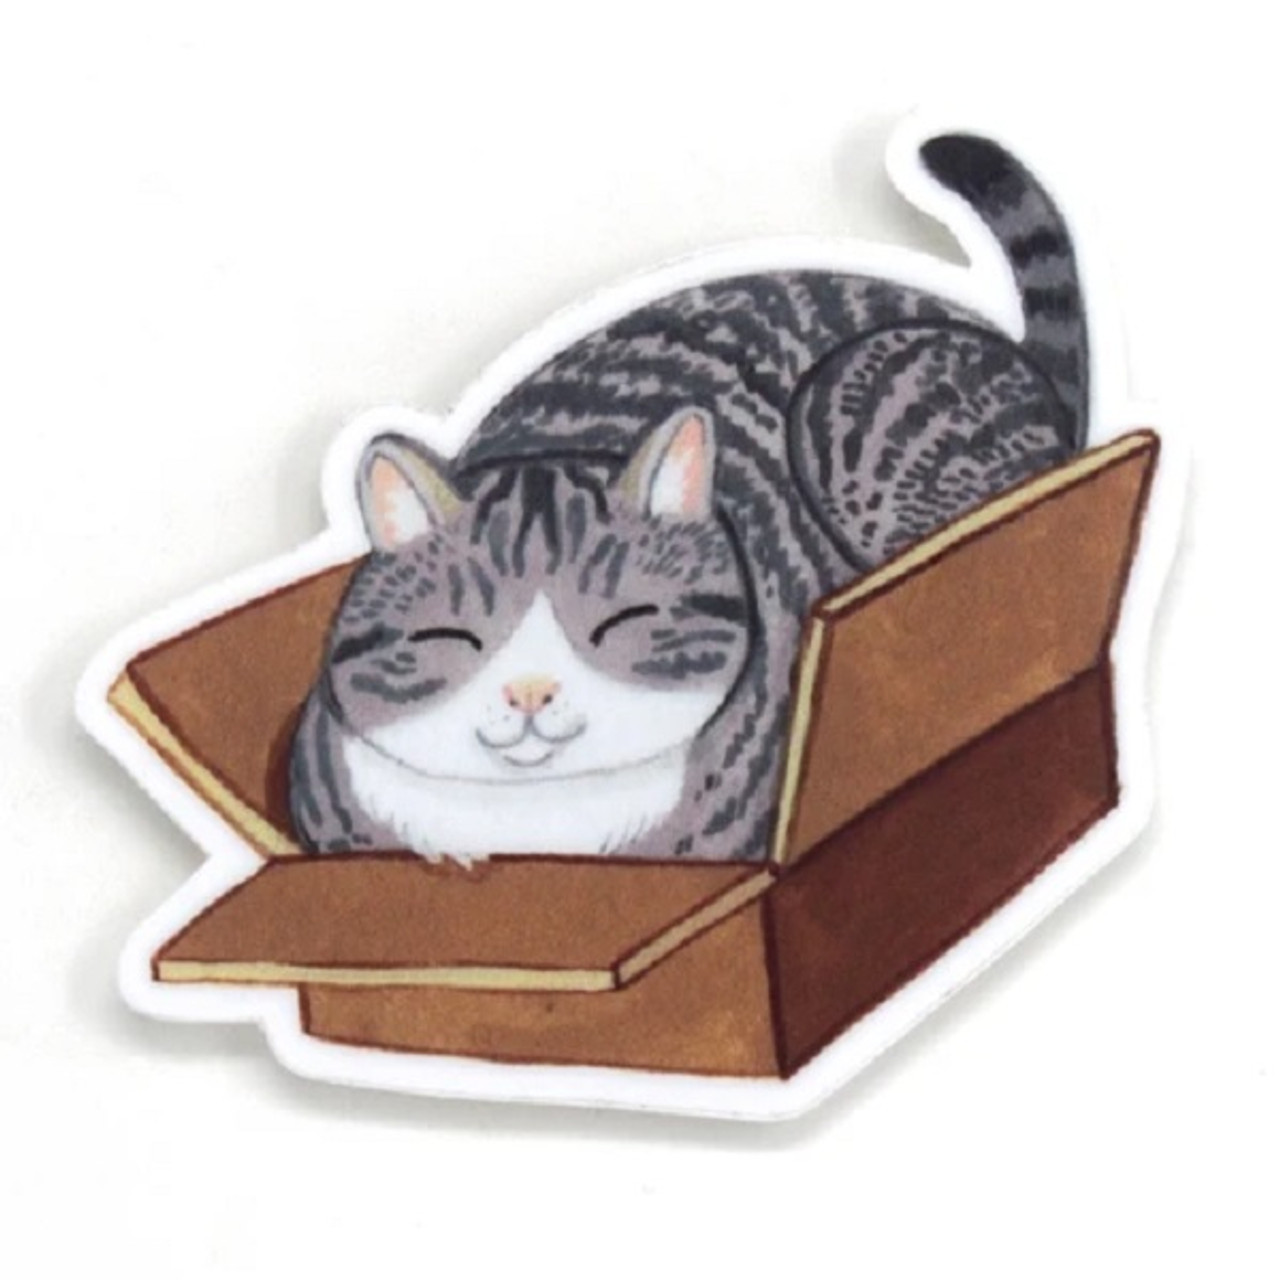 Long Haired Brown Tabby Cat Sticker Decal Brown Cat Water 